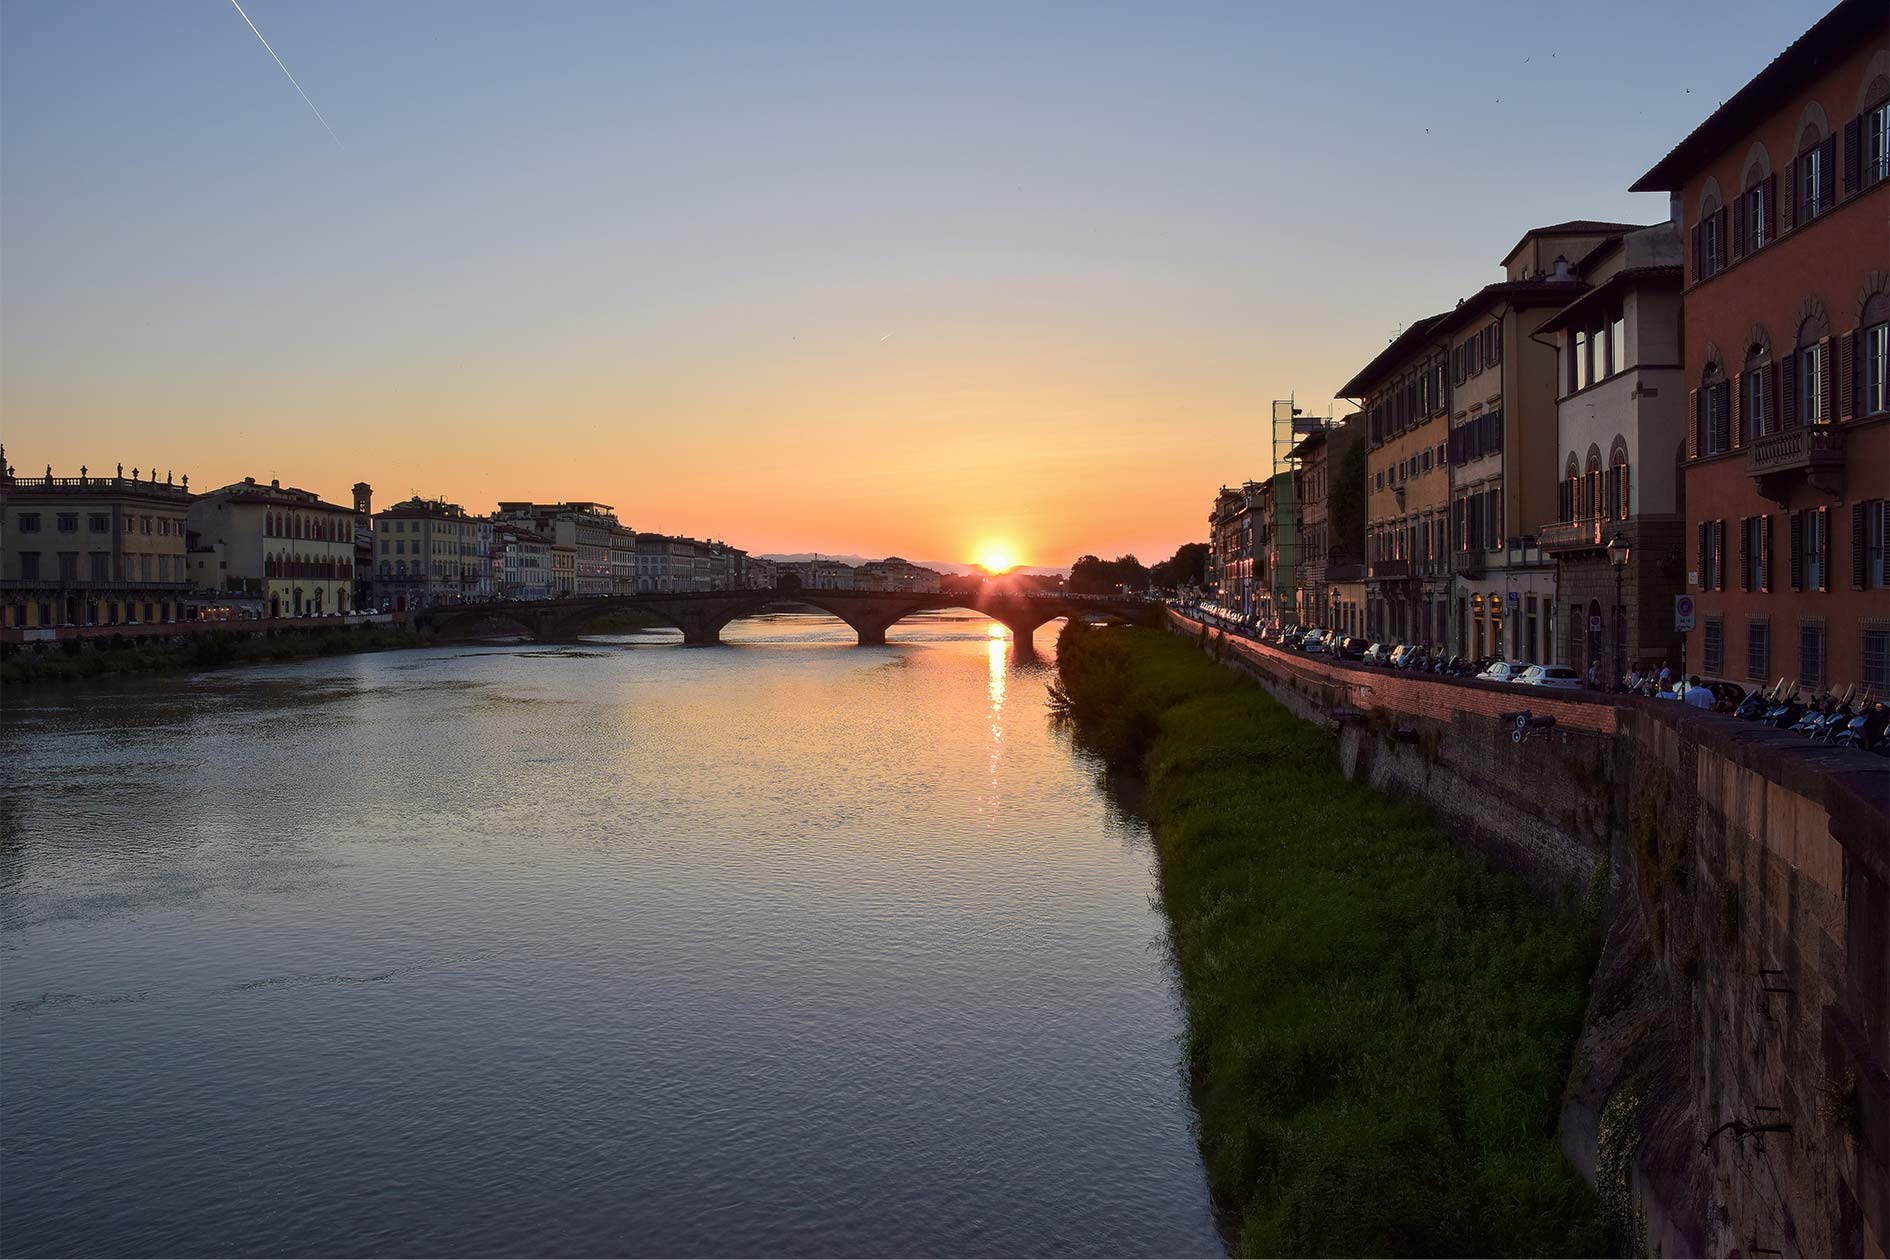 An amazing view on the River Arno